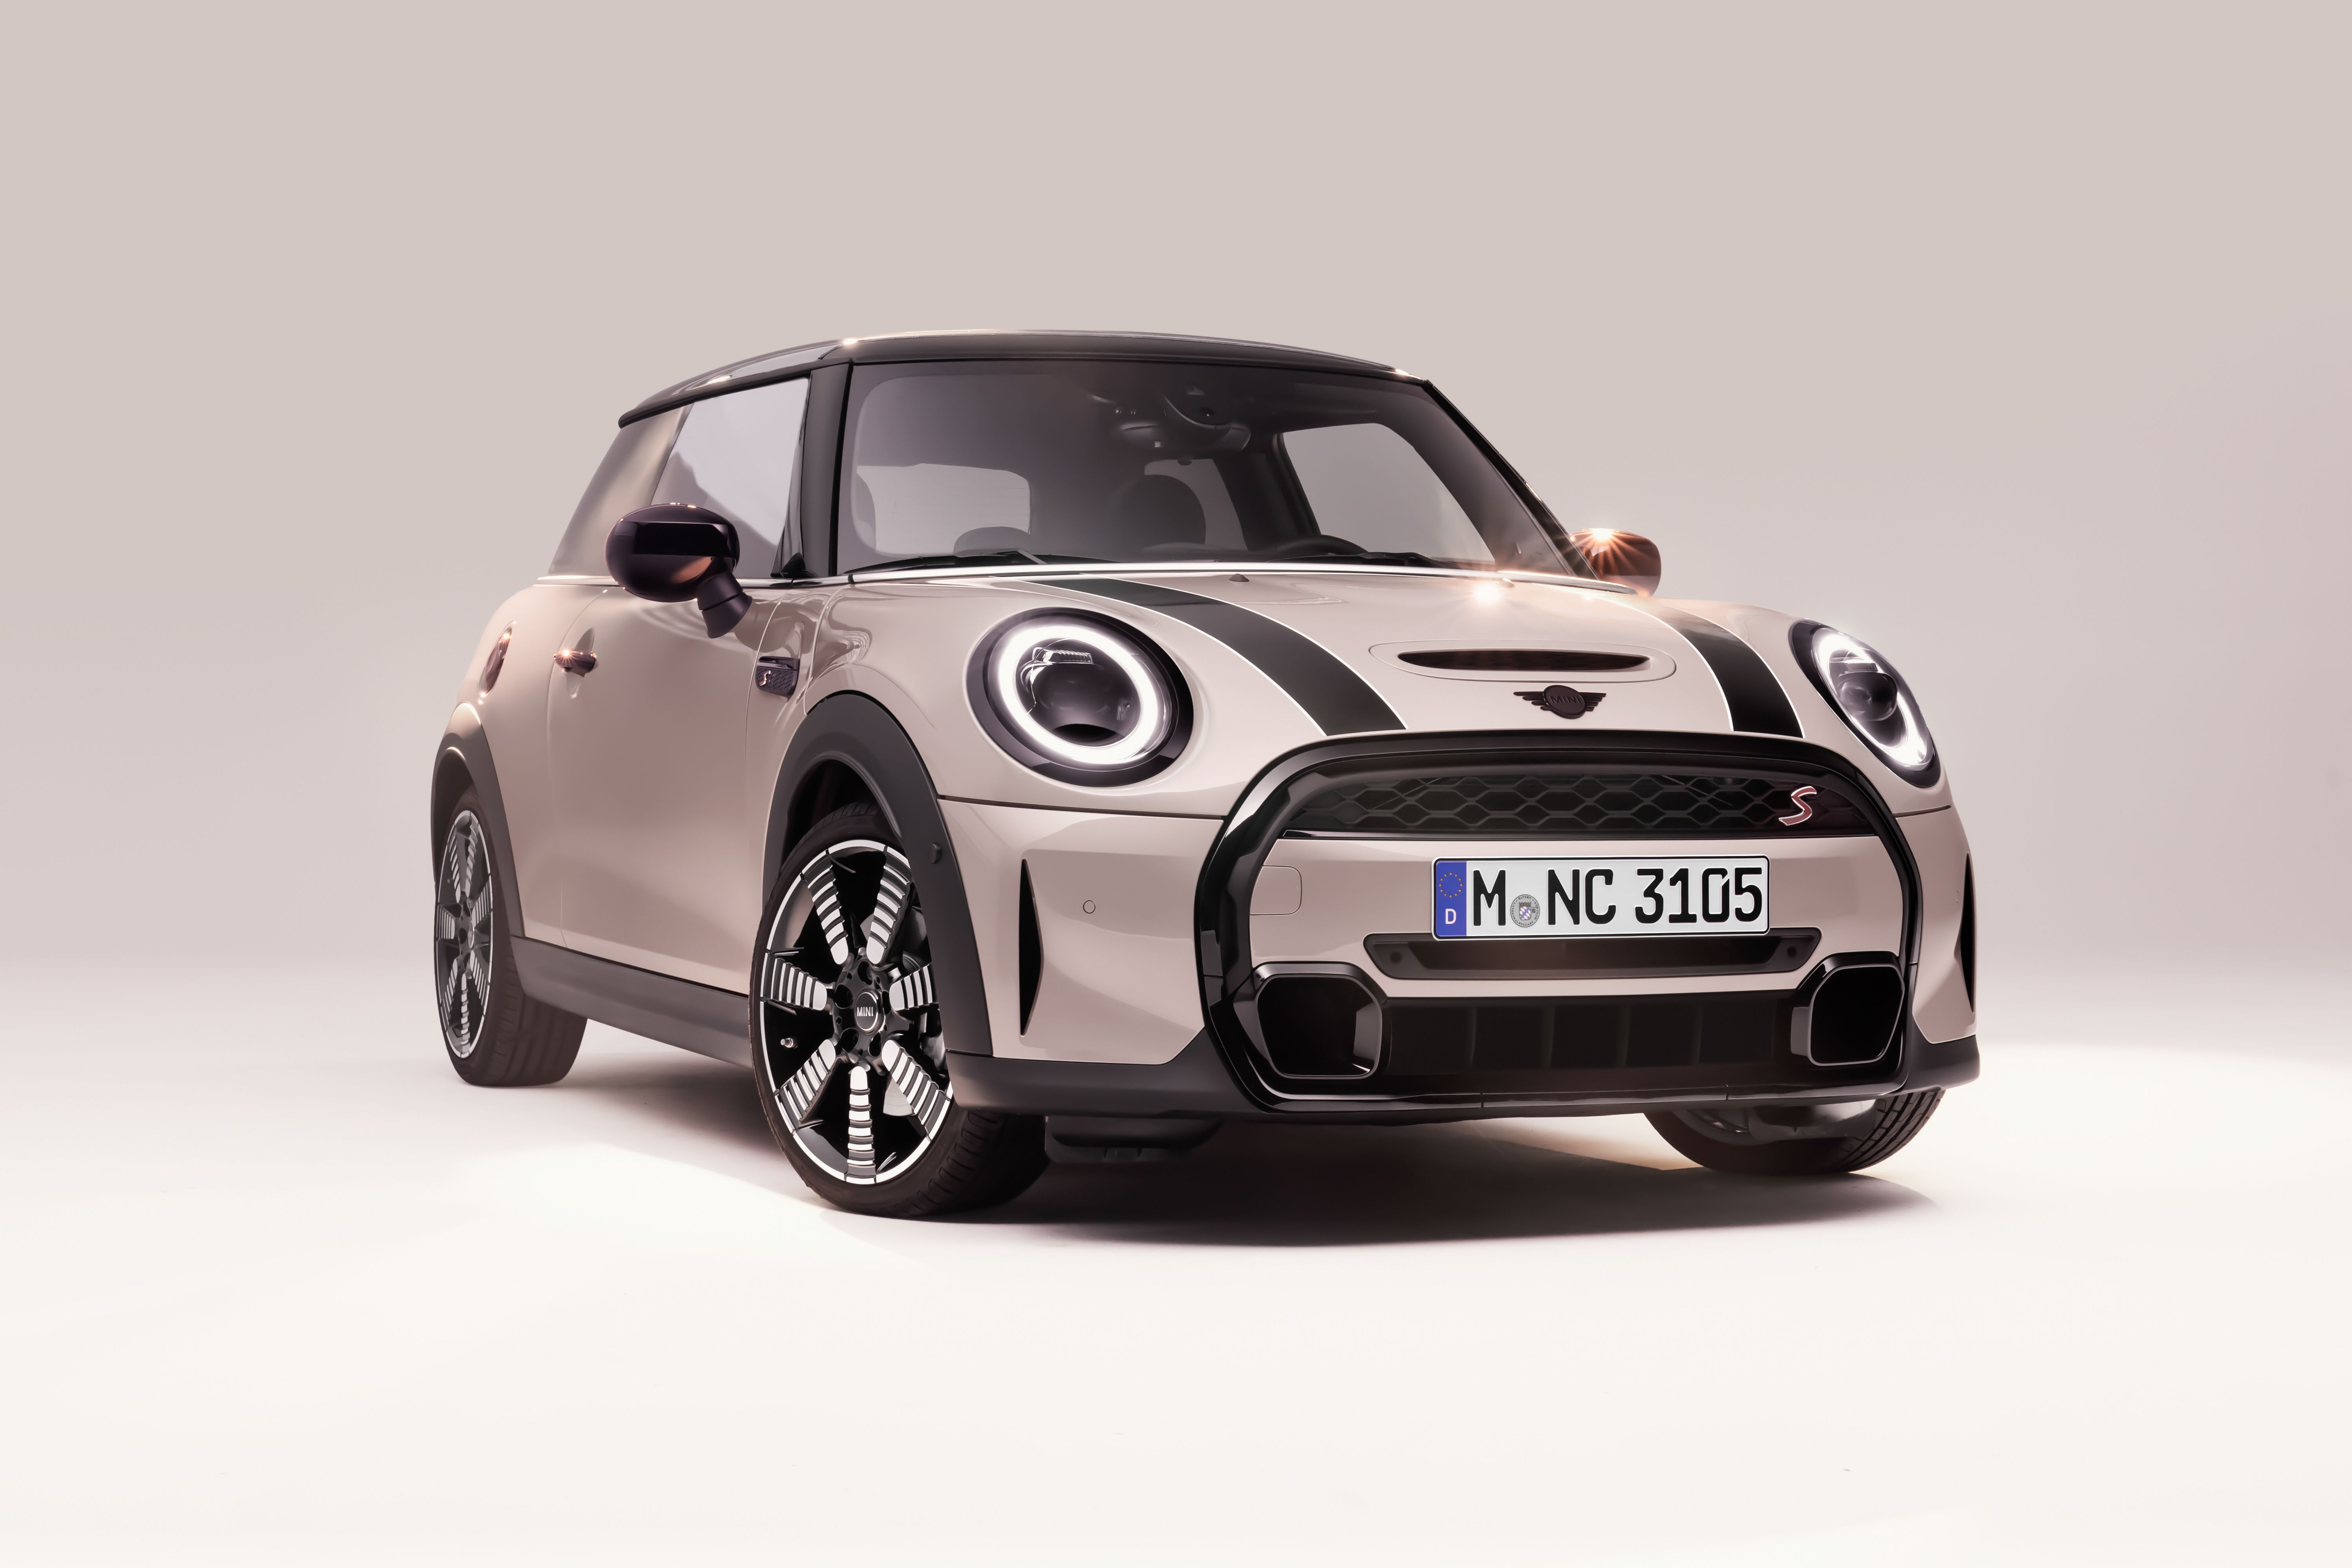 2022 Mini Cooper S is all about personality - CNET